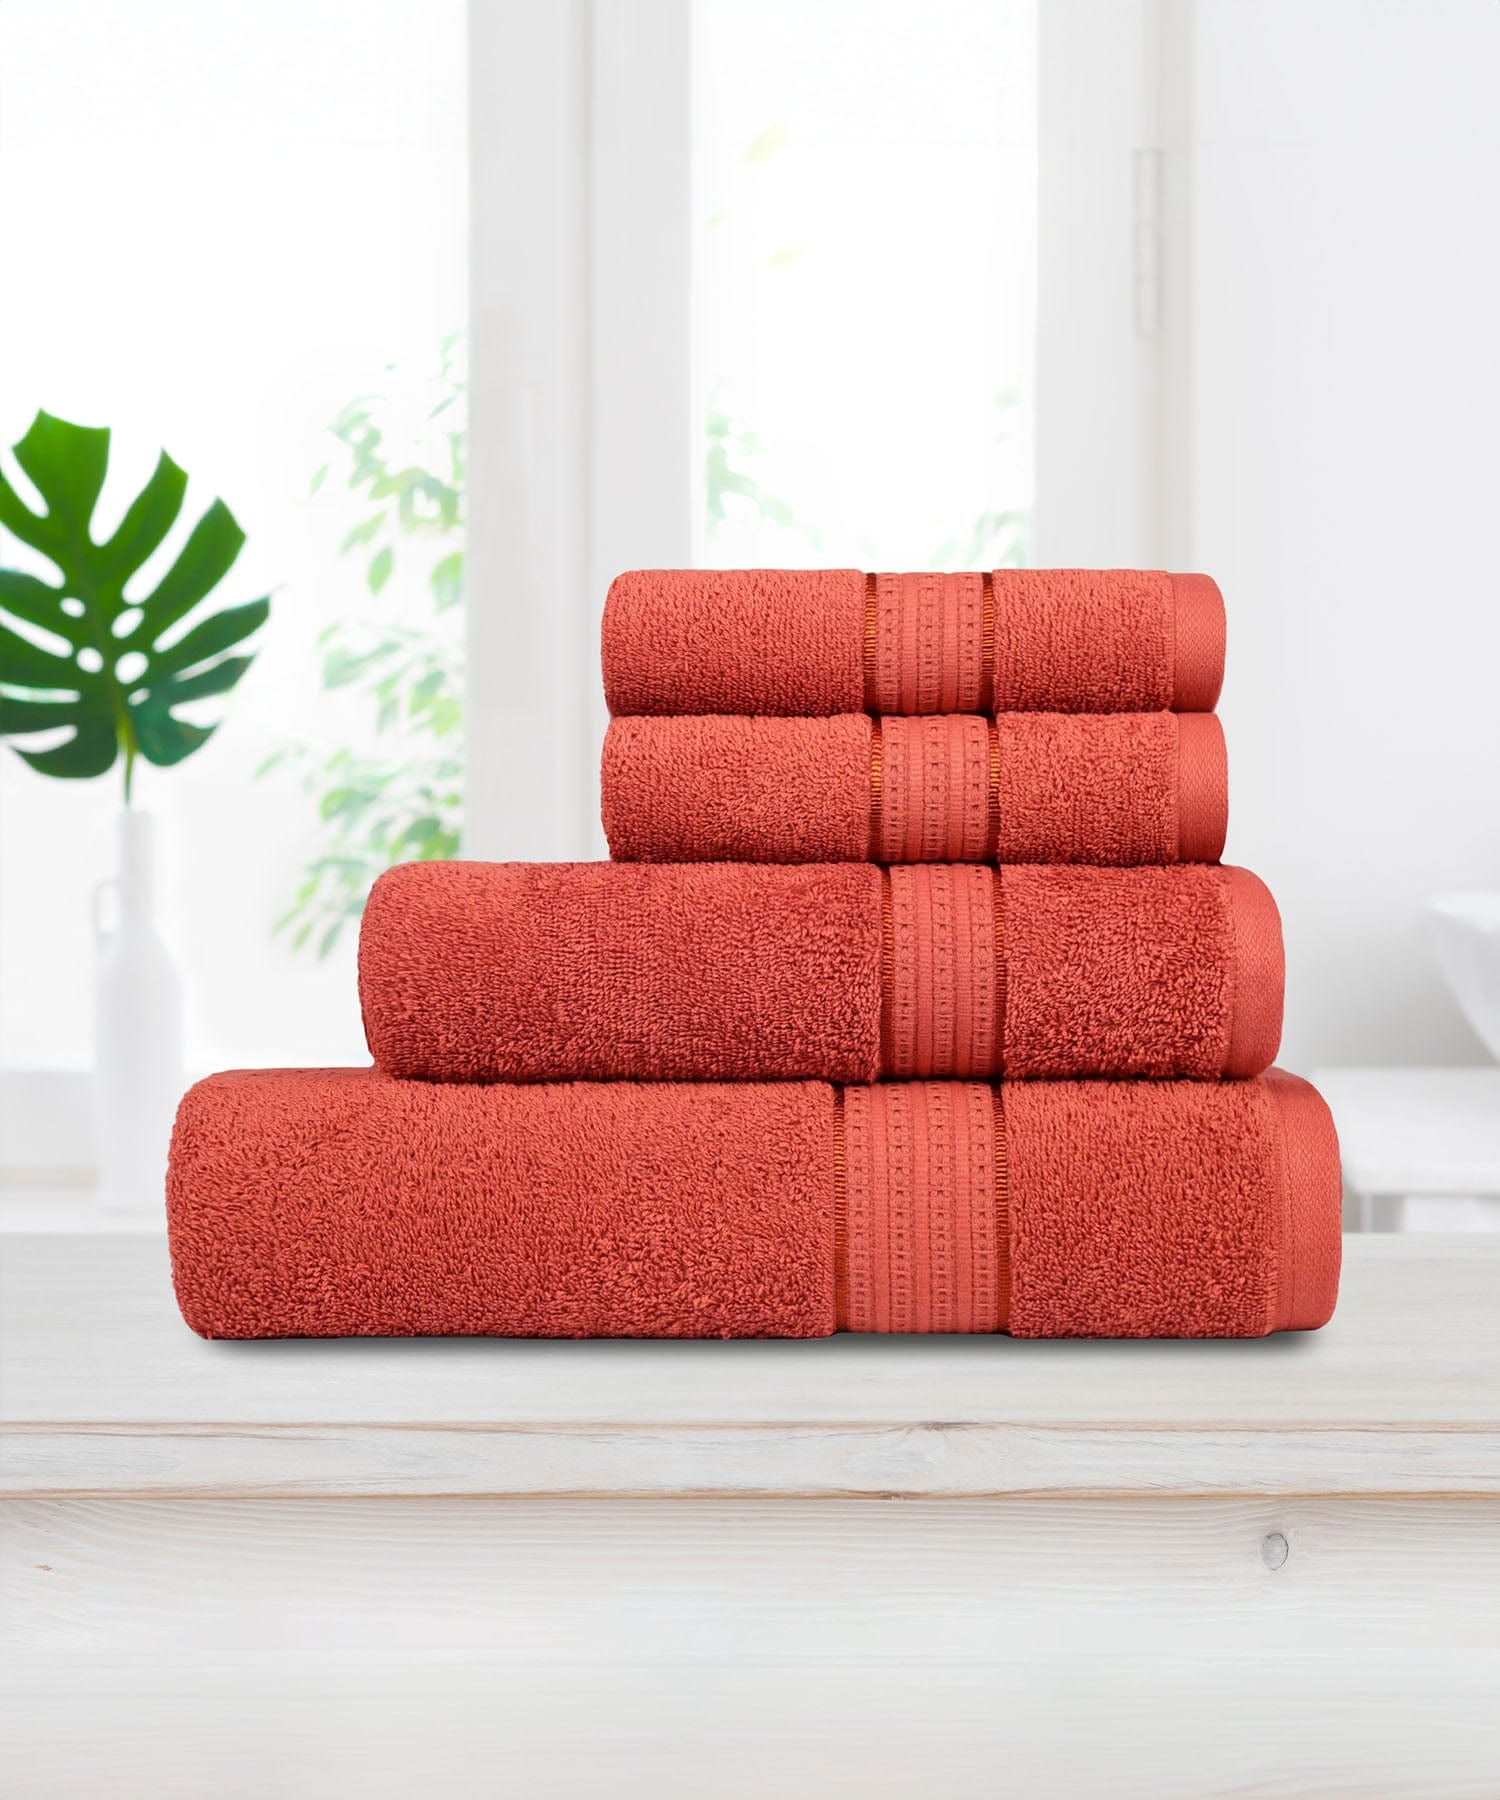 CARNIVAL TOWEL,100% Cotton,Durable,Super Soft, RED RUST